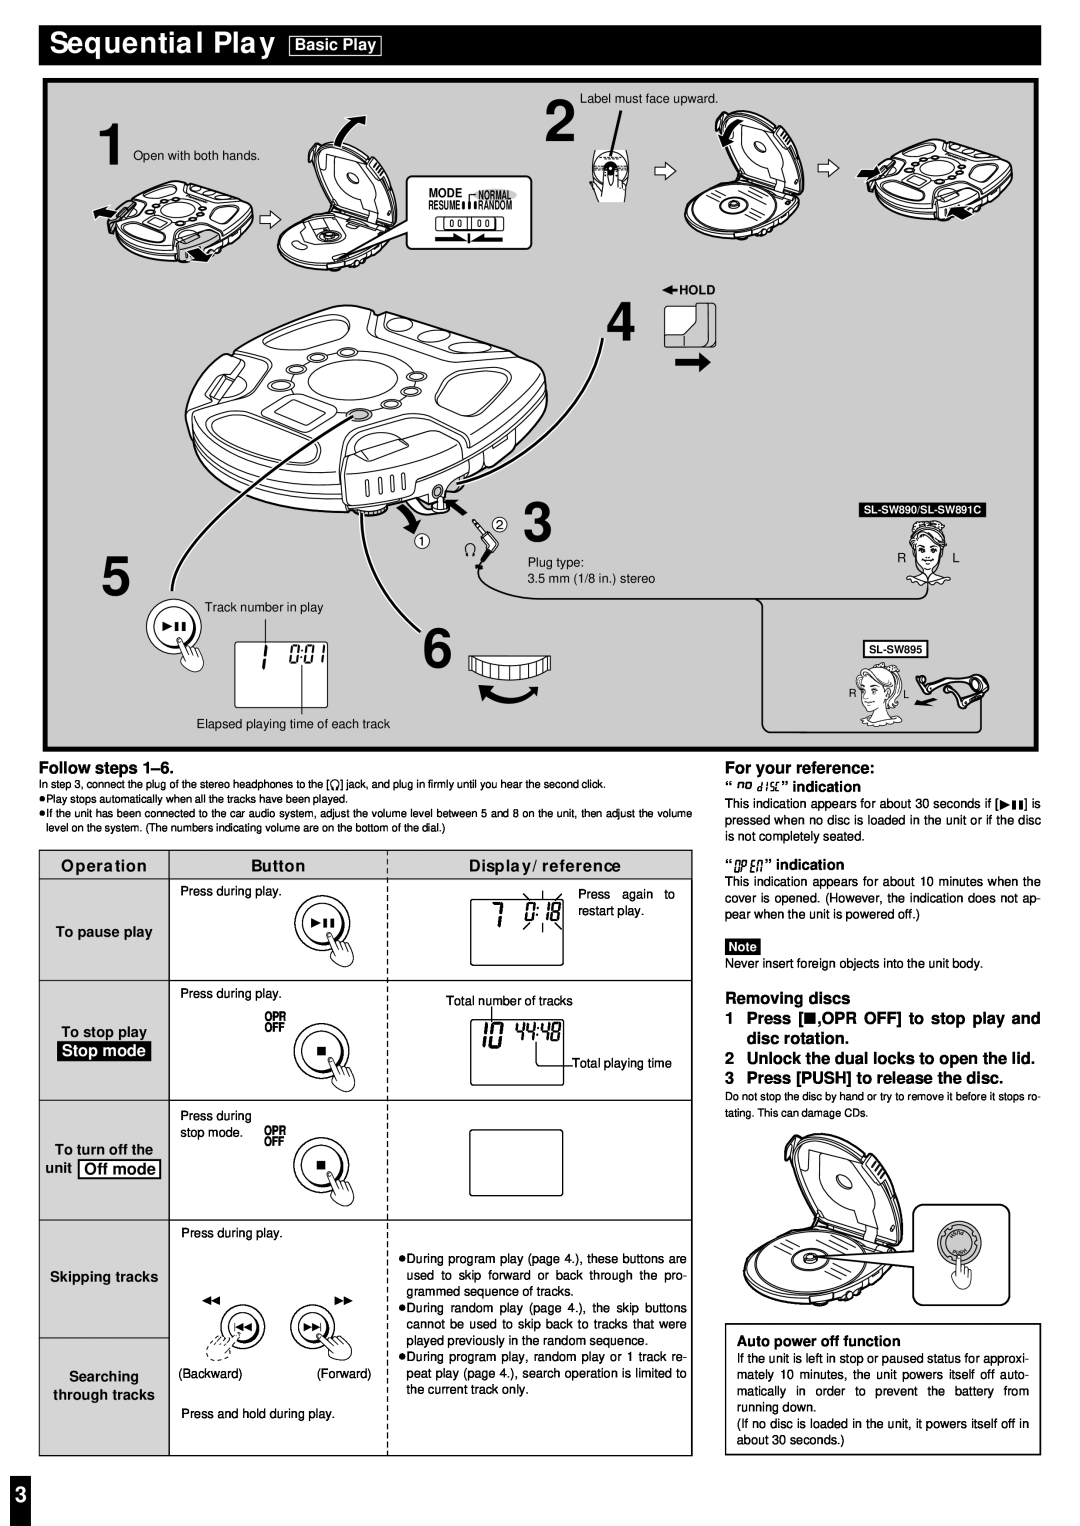 Panasonic SL-SW891C Sequential Play, Basic Play, Follow steps, For your reference, Operation, Button, Display/reference 